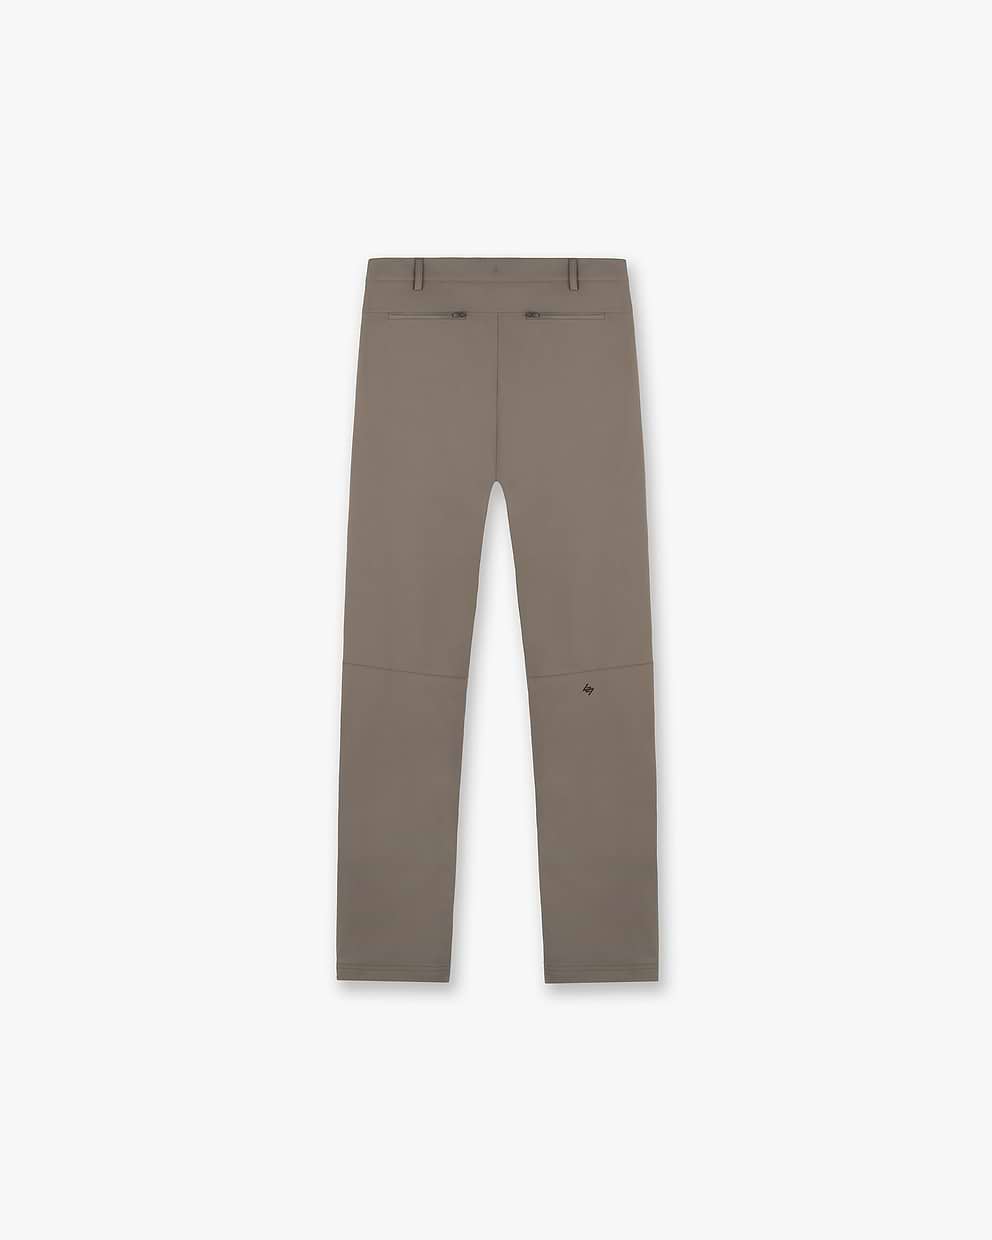 247 Mission Pant - Army